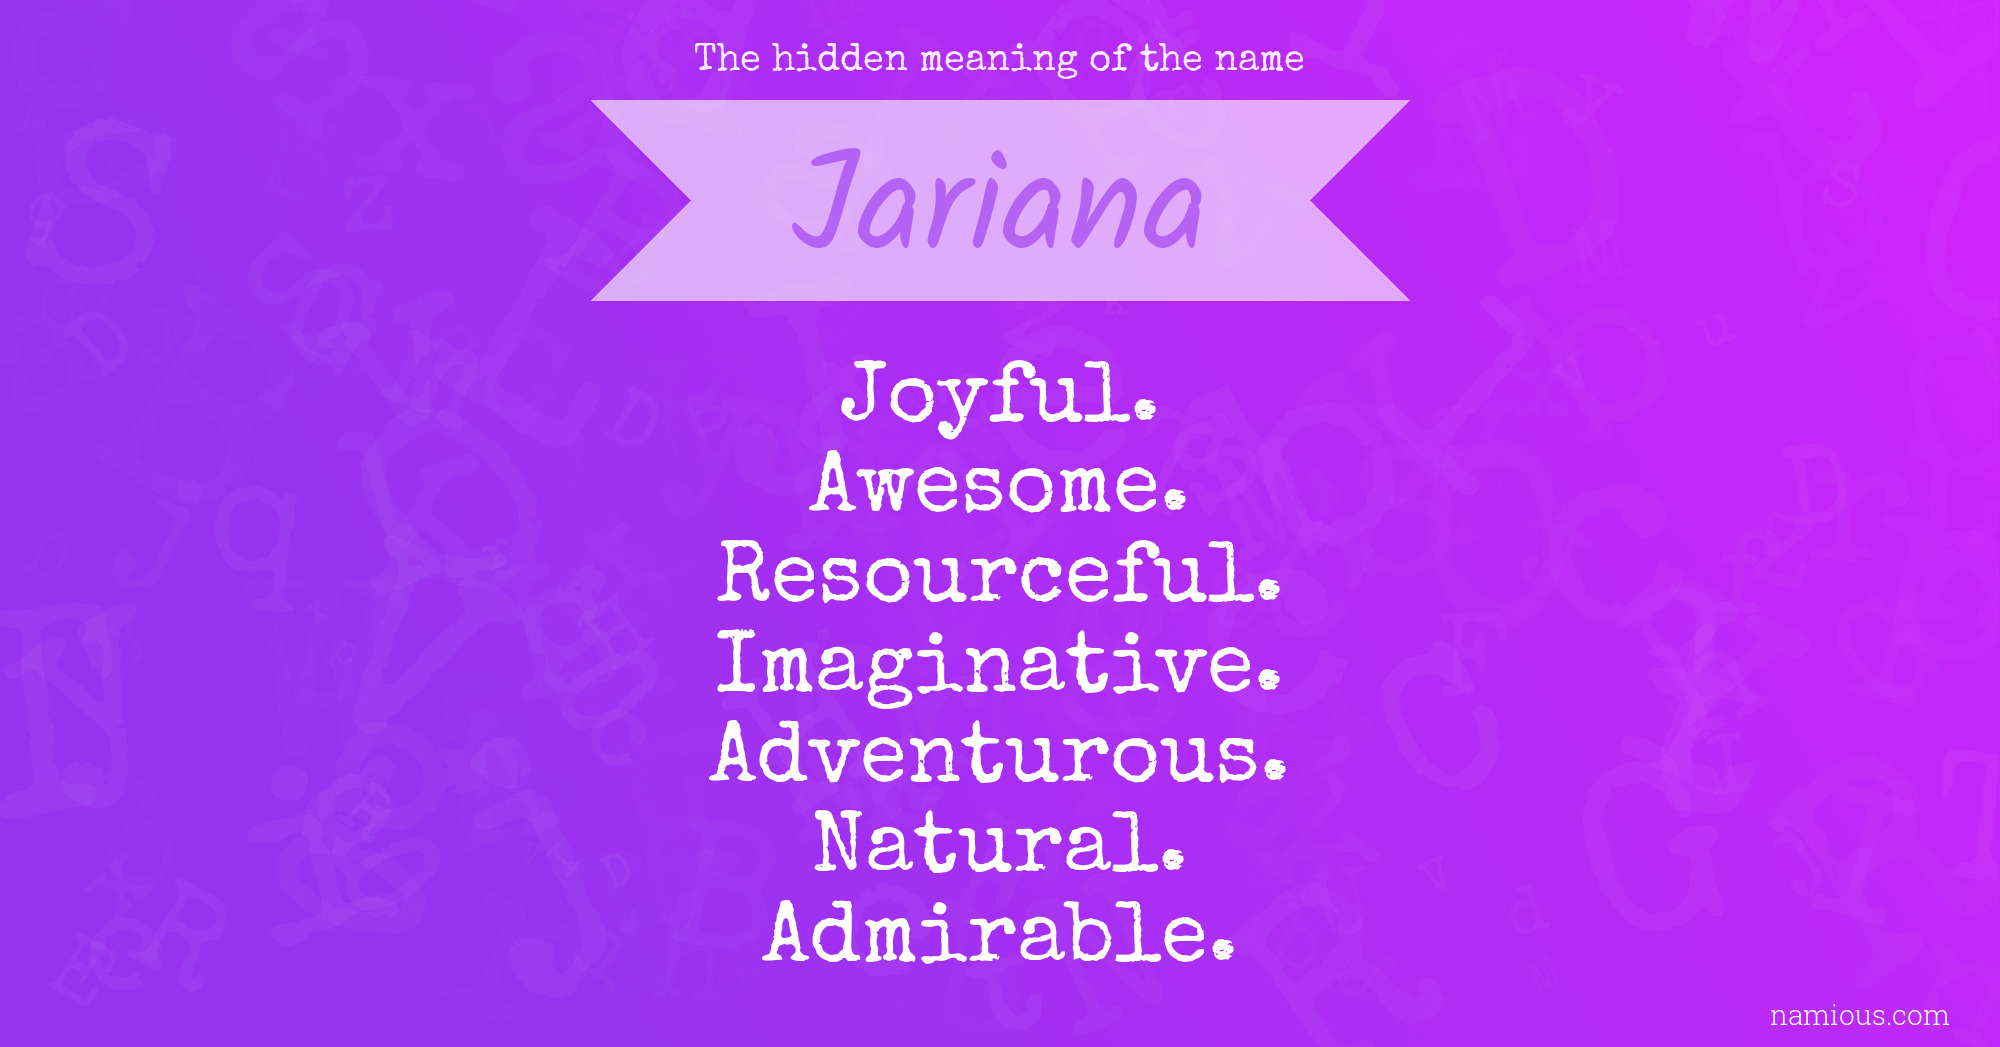 The hidden meaning of the name Jariana